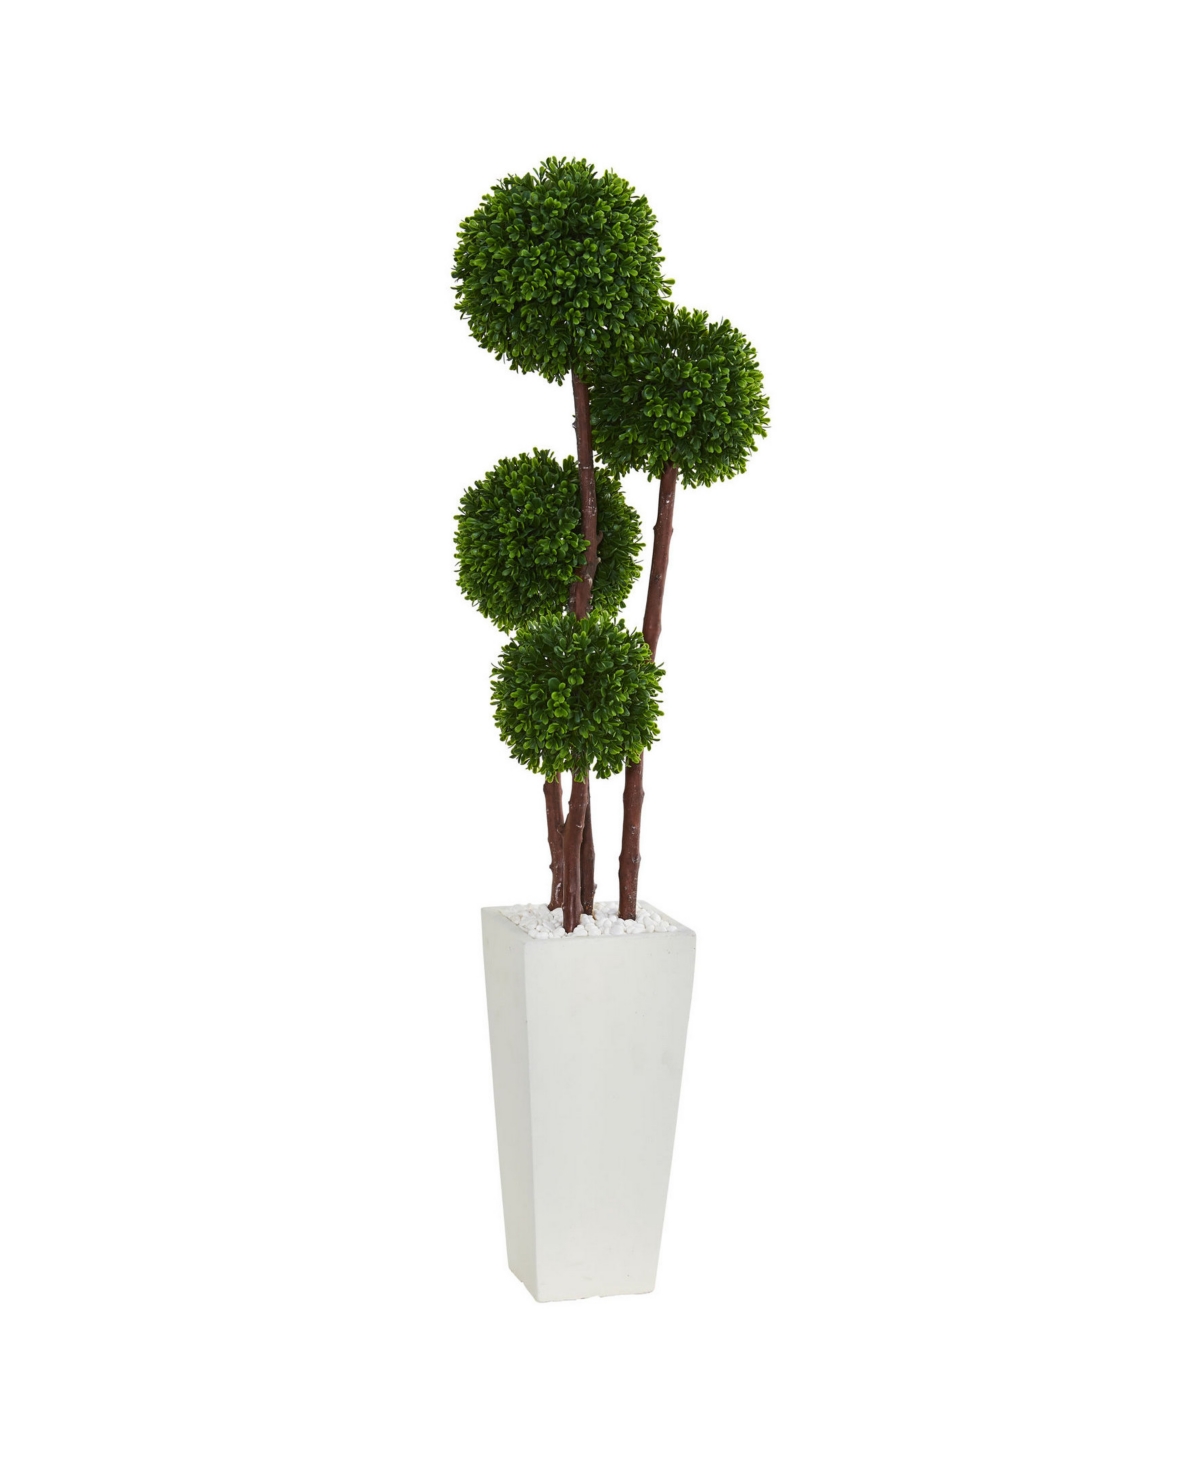 4' Boxwood Artificial Topiary Tree in Planter Uv Resistant - Green